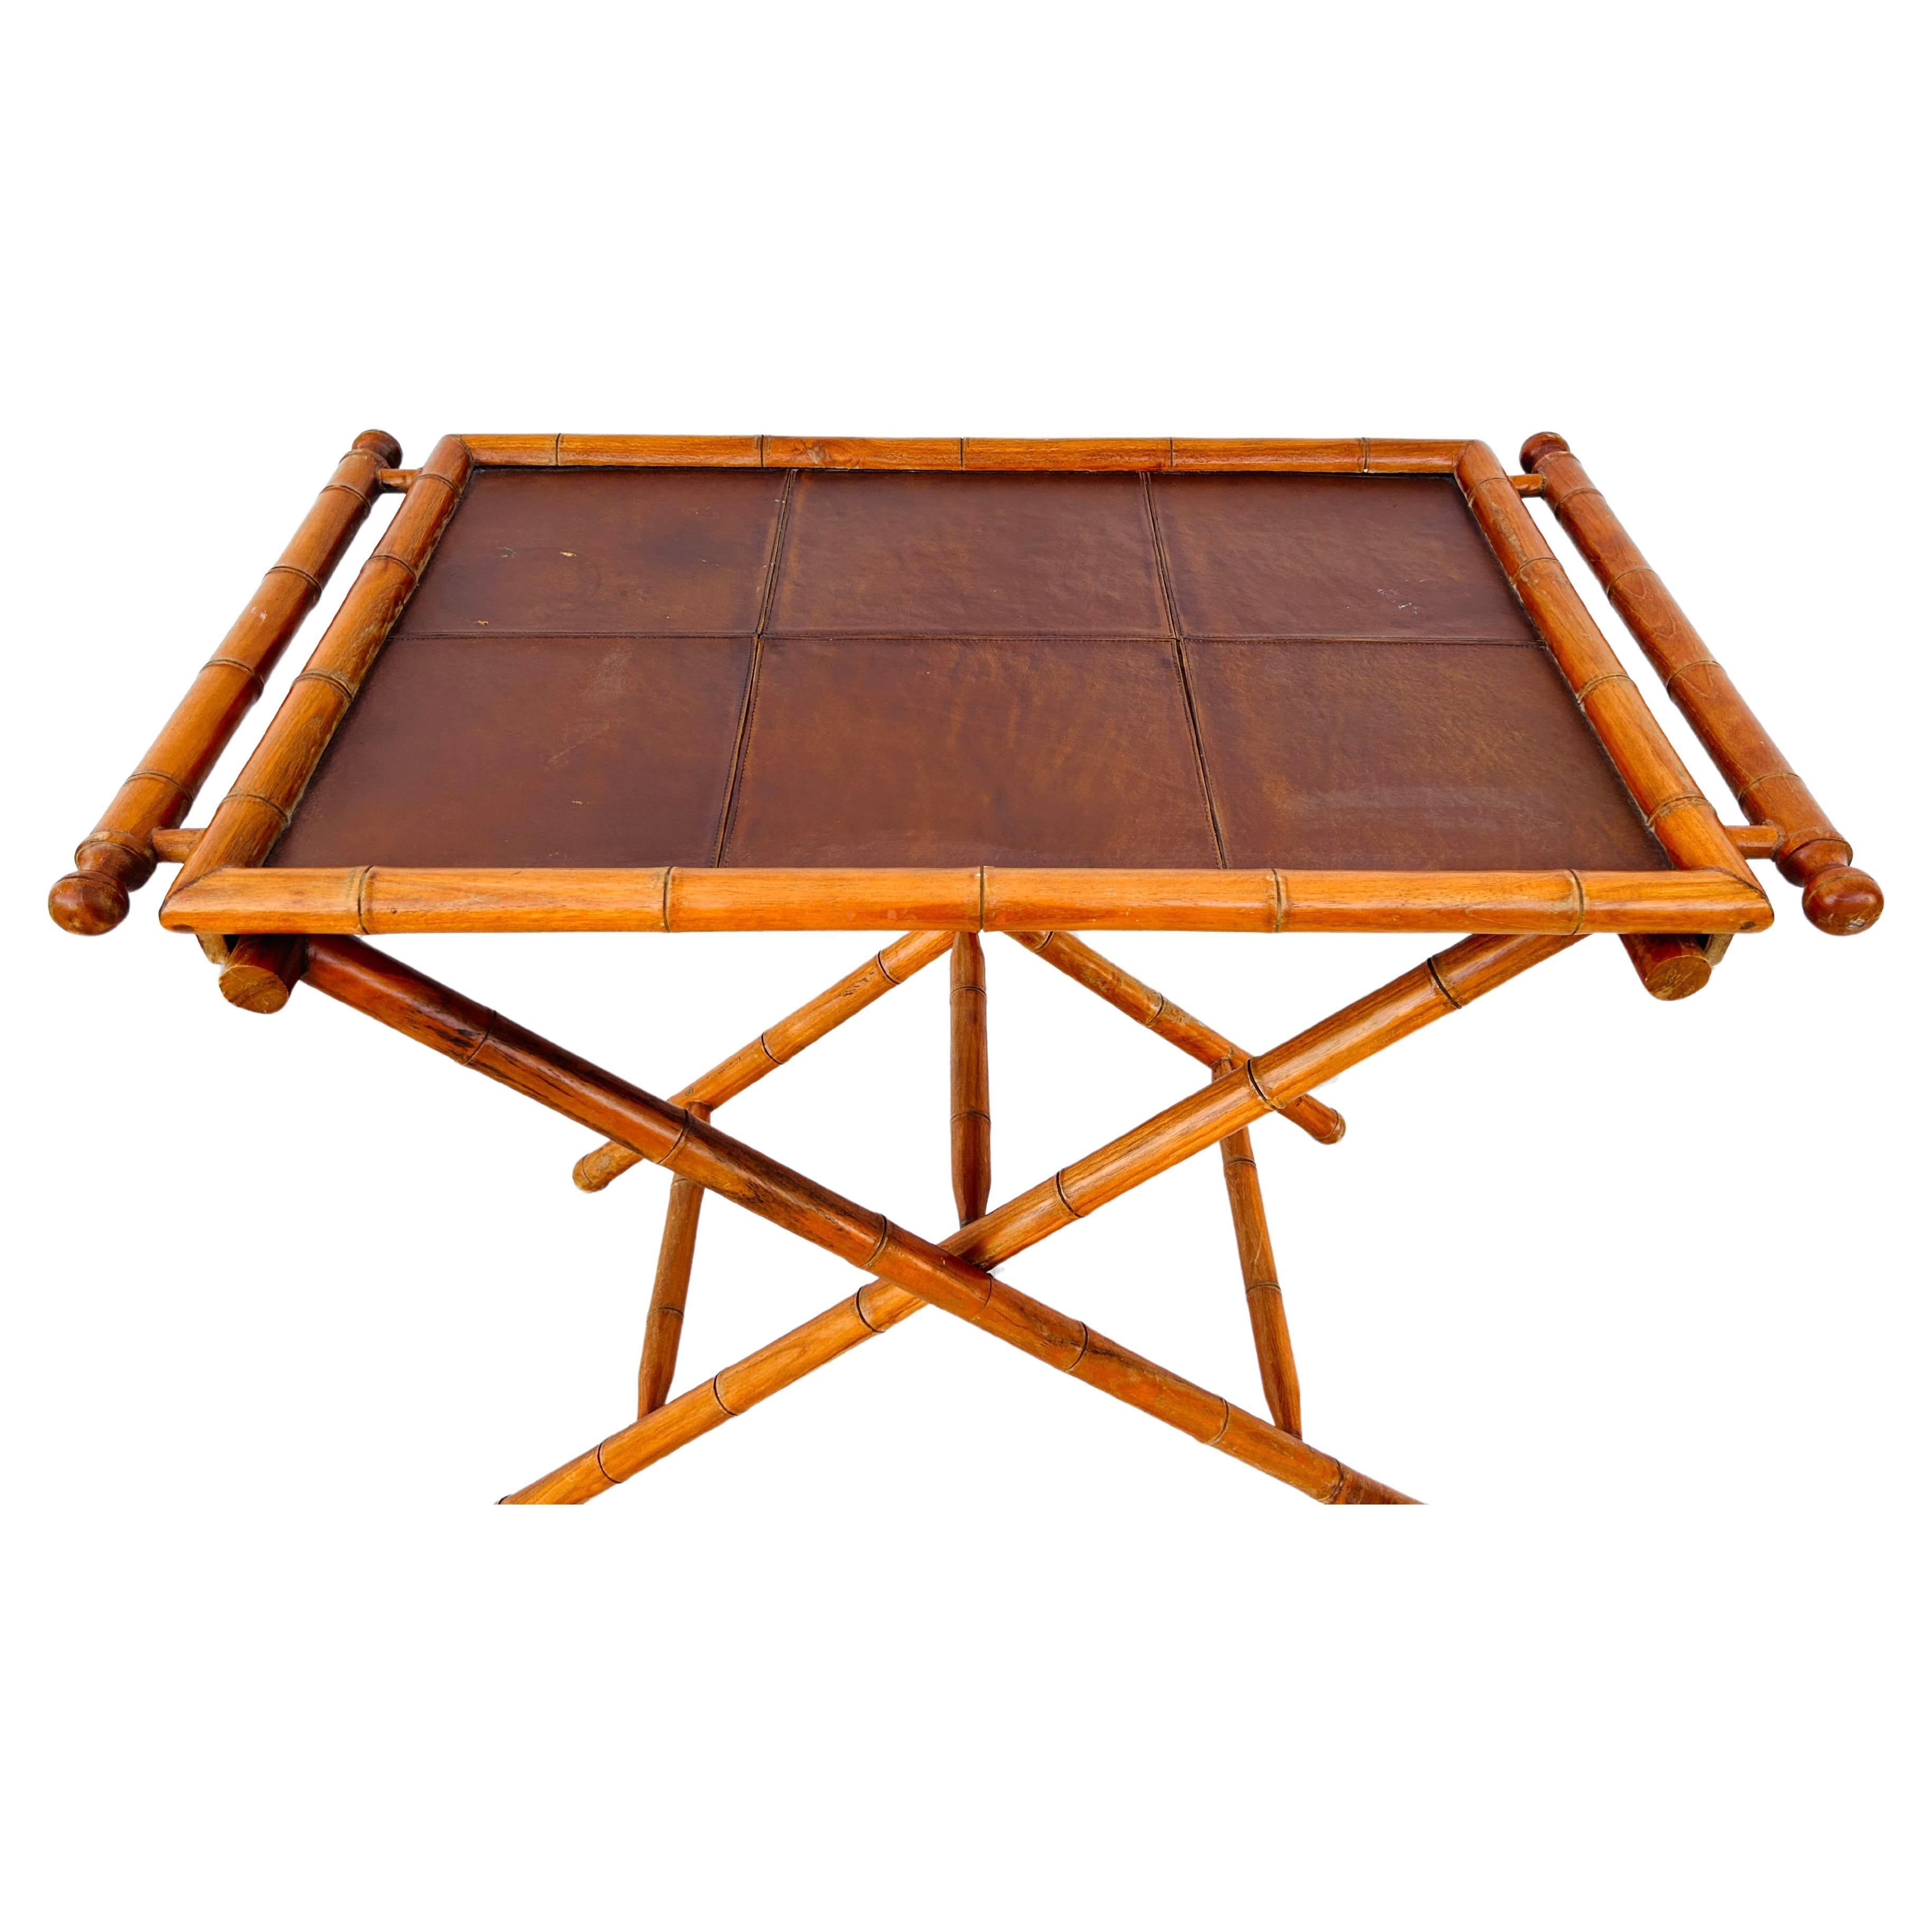 Mid-century modern bamboo rectangular folding serving tray with removable leather insert top. Bamboo handles on either side of tray, along with sturdy leather straps on base. Tray is easily removed for serving purposes. Perfect for serving tea,